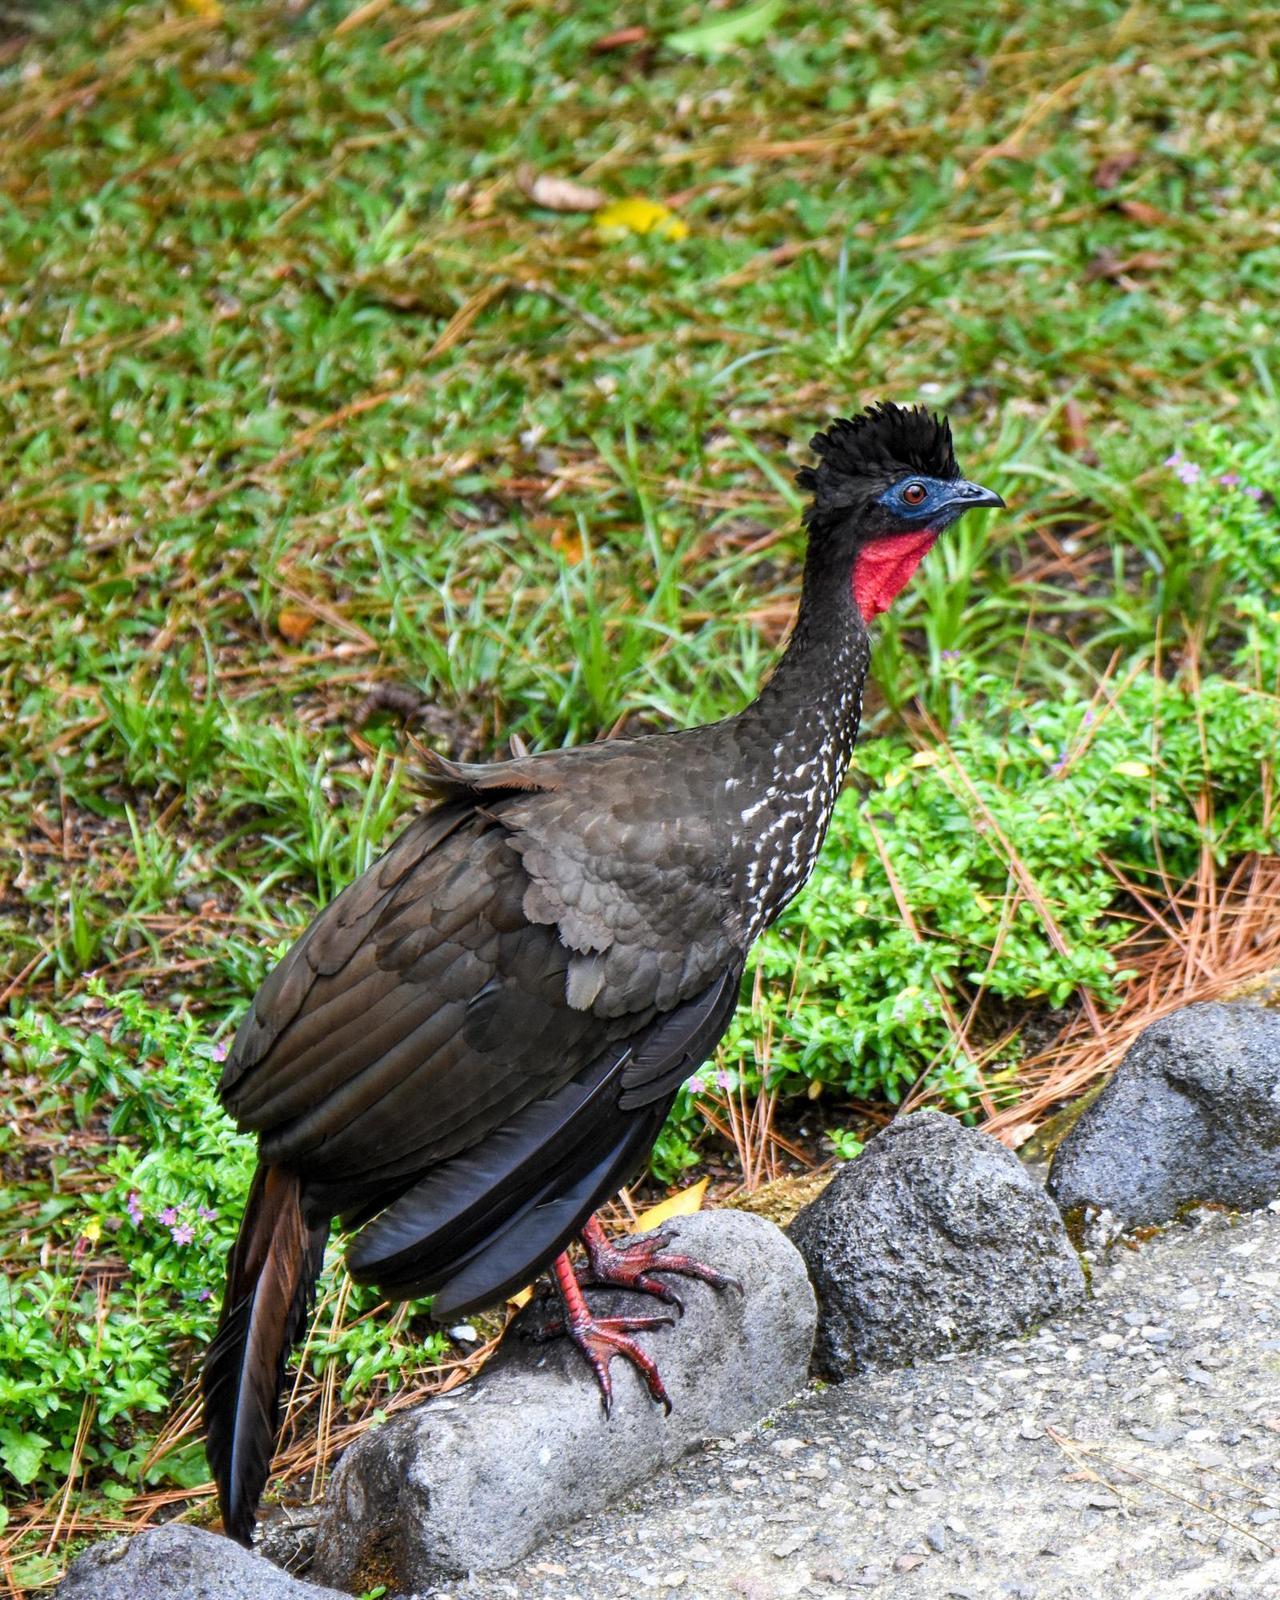 Crested Guan Photo by Cherylyn Murphy